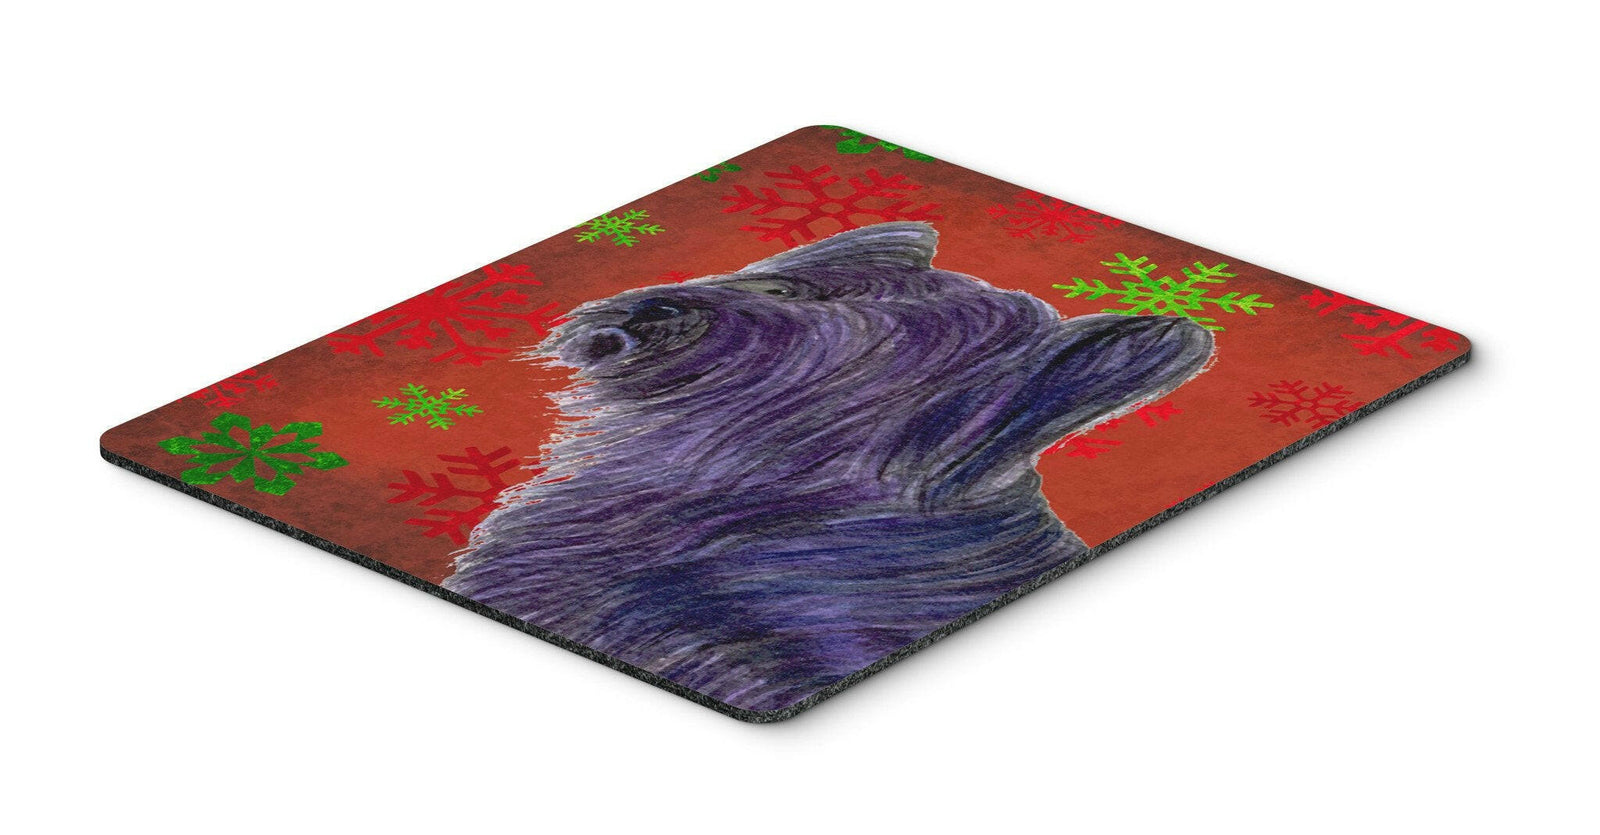 Skye Terrier Red and Green Snowflakes Christmas Mouse Pad, Hot Pad or Trivet by Caroline's Treasures